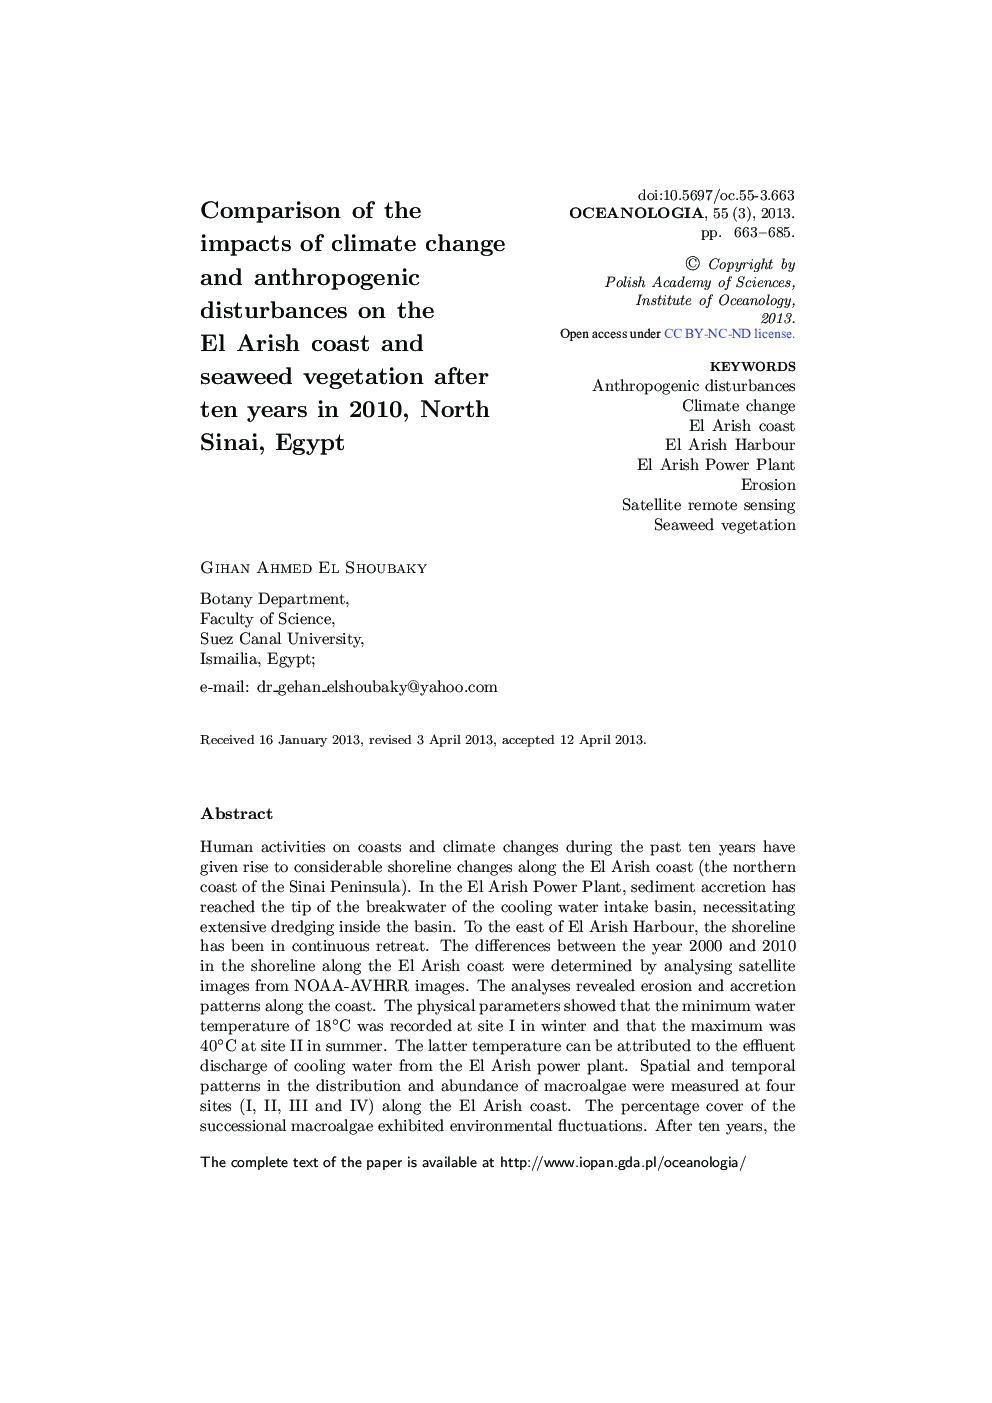 Comparison of the impacts of climate change and anthropogenic disturbances on the El Arish coast and seaweed vegetation after ten years in 2010, North Sinai, Egypt 